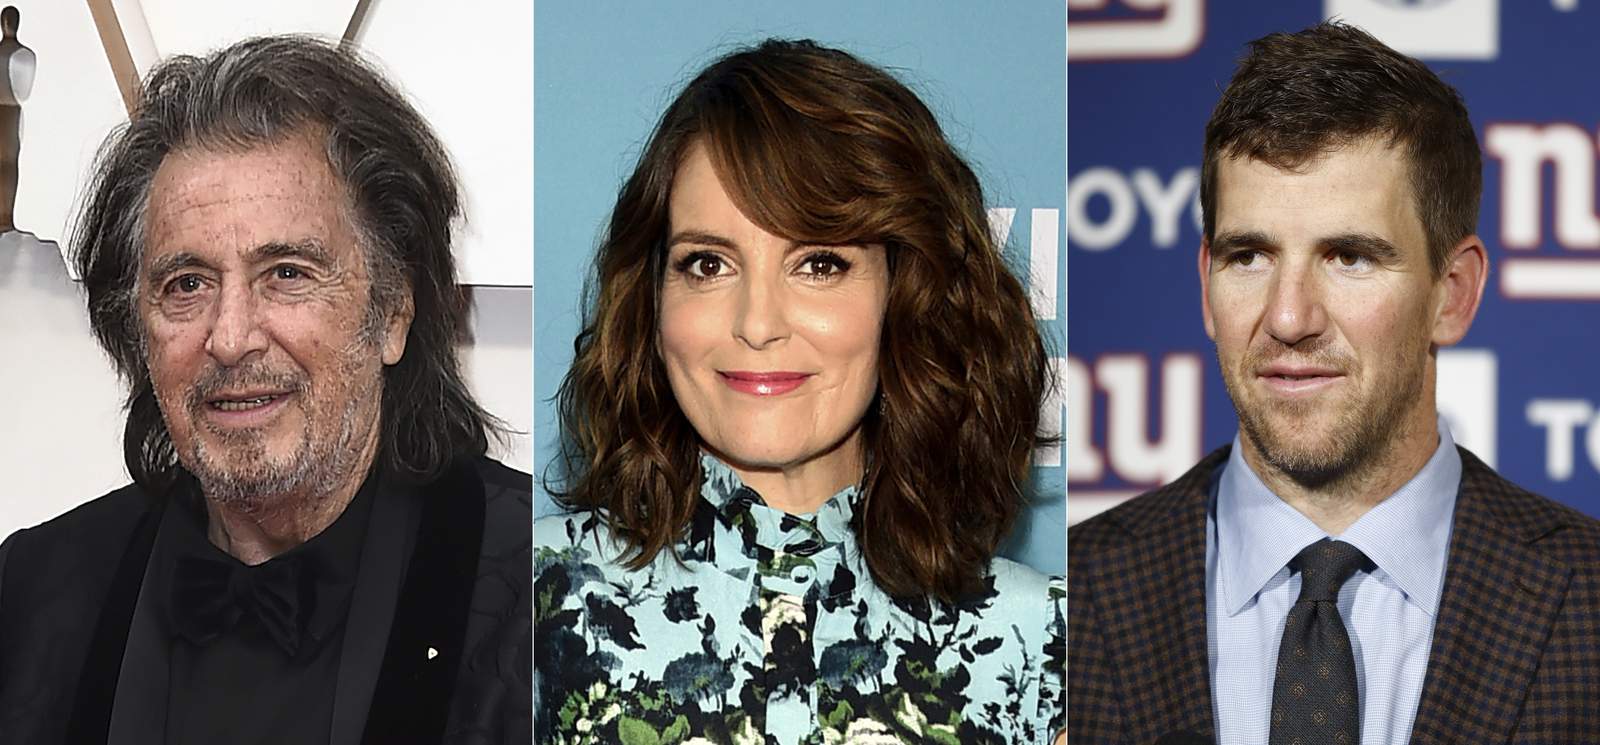 Al Pacino, Tina Fey to appear in 'Heroes of New York' lineup